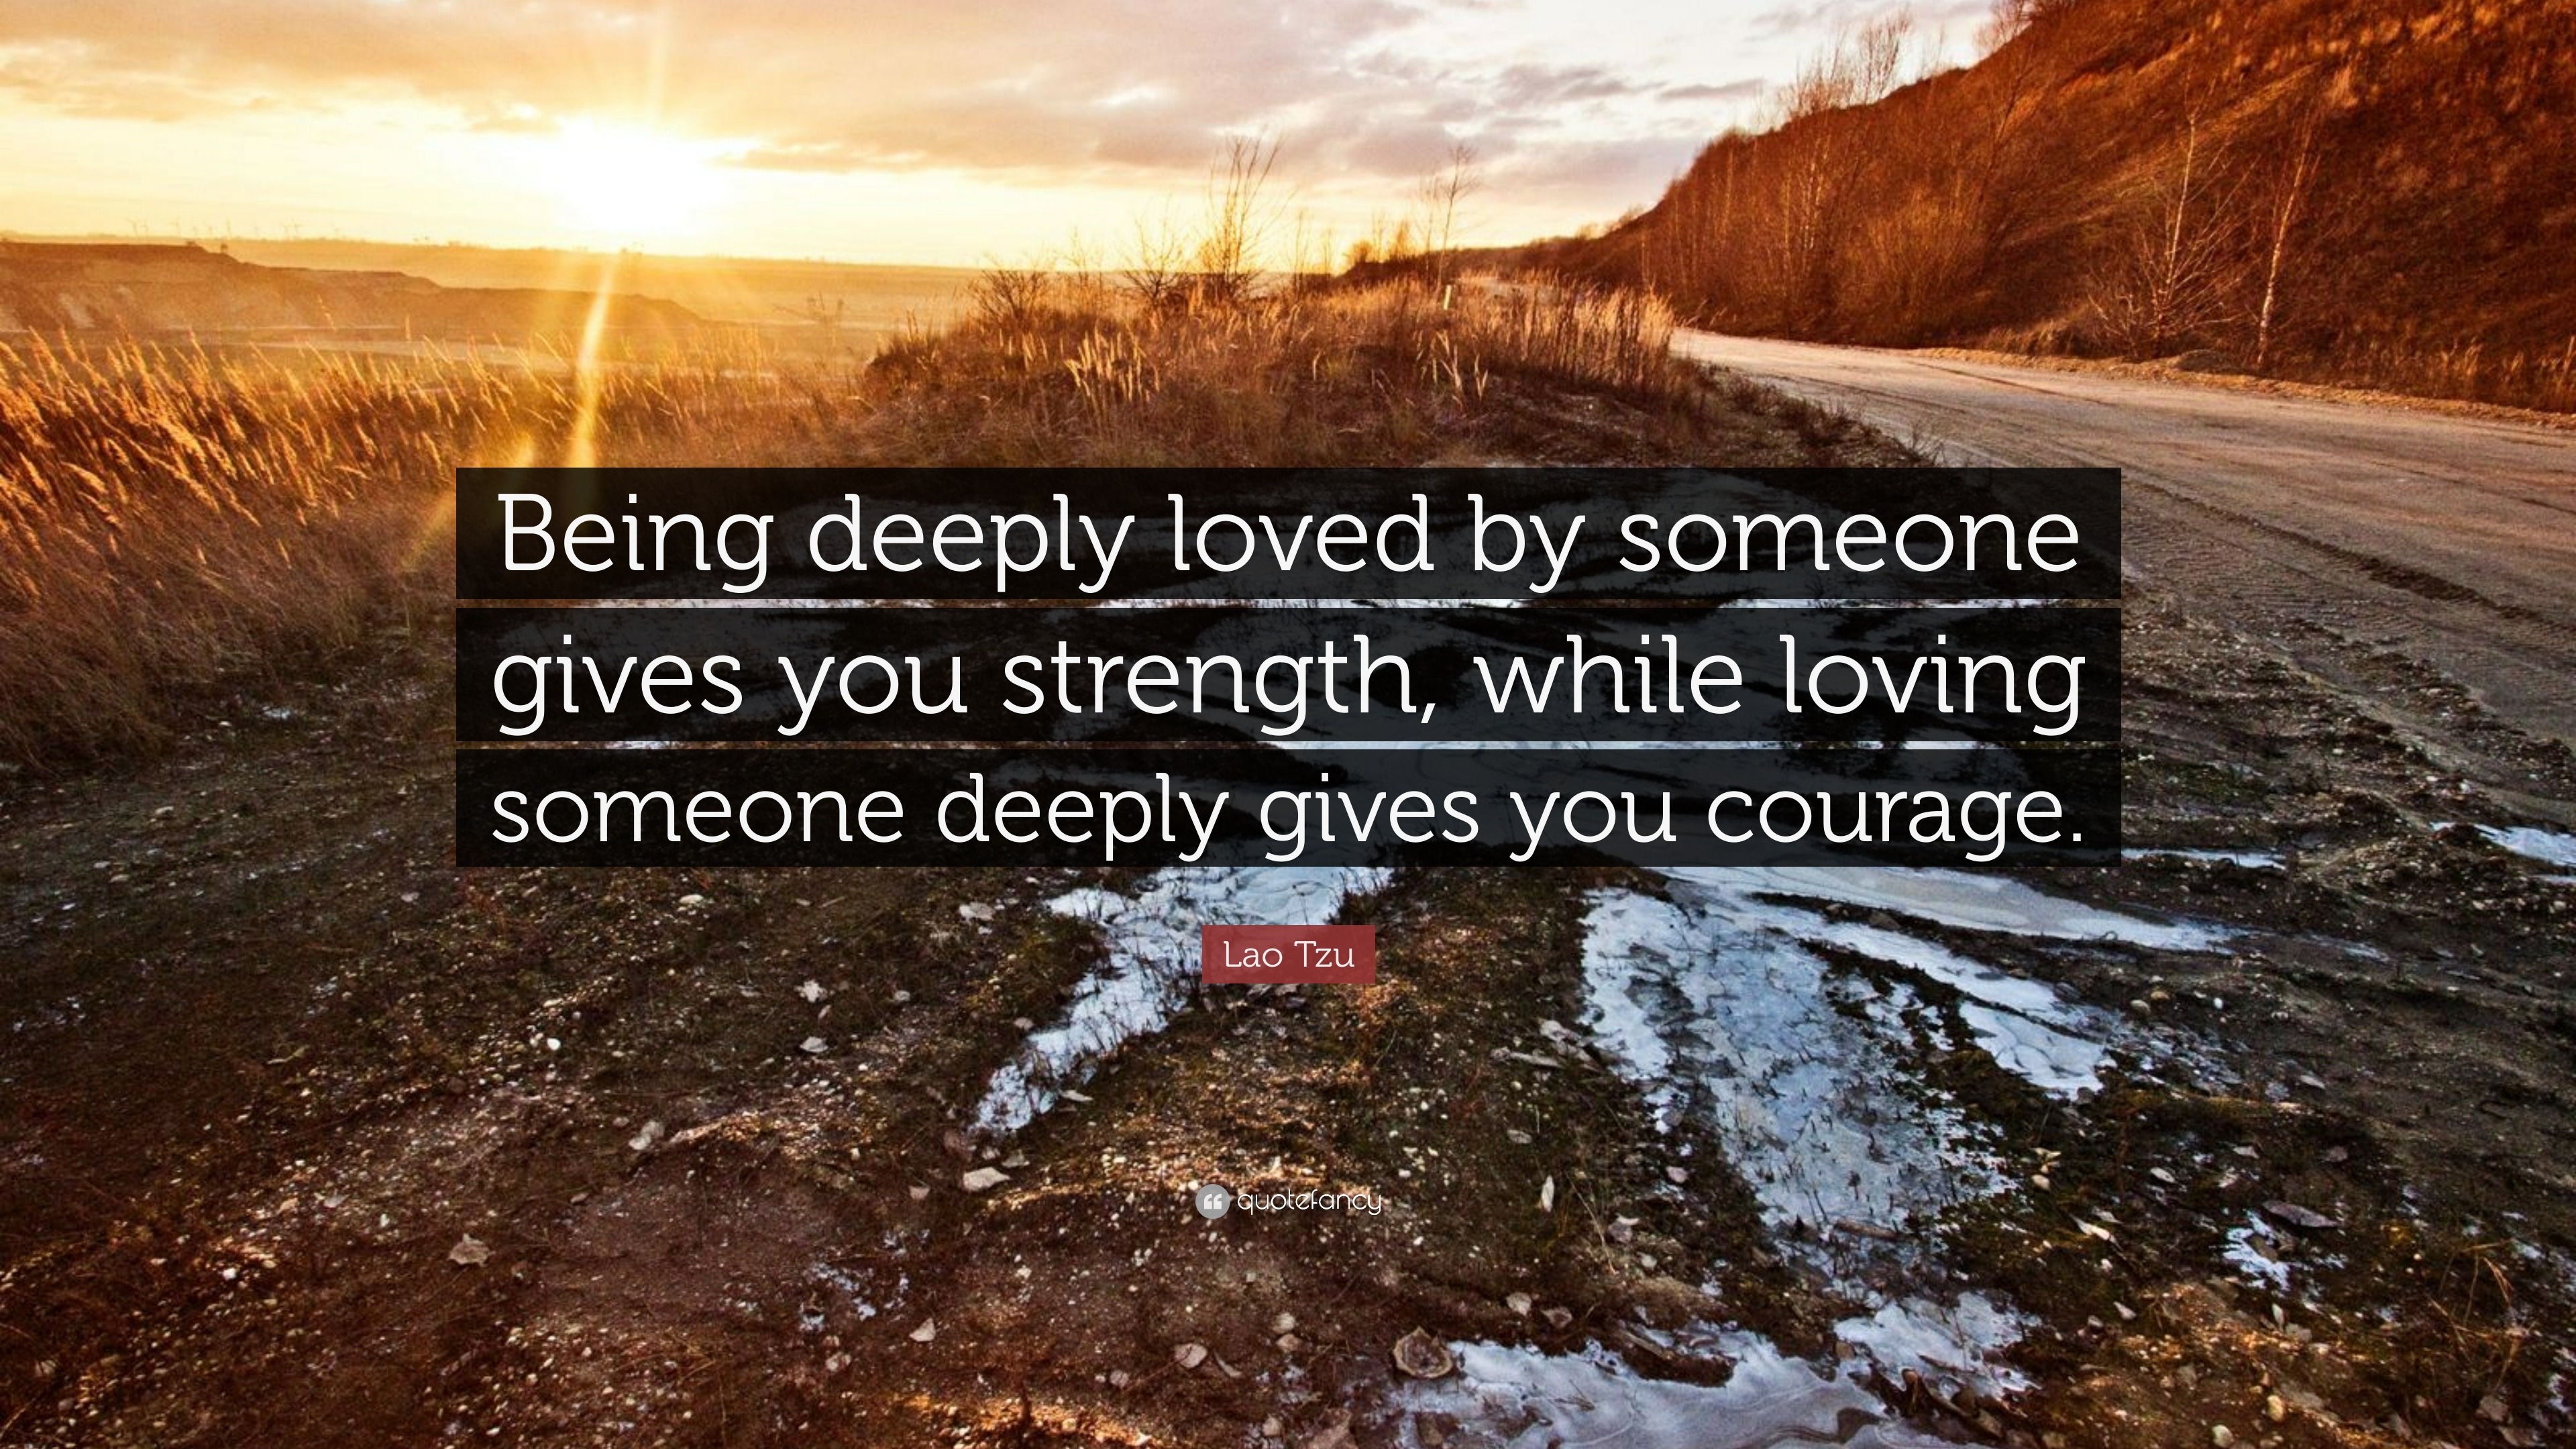 Lao Tzu Quote “Being deeply loved by someone gives you strength while loving